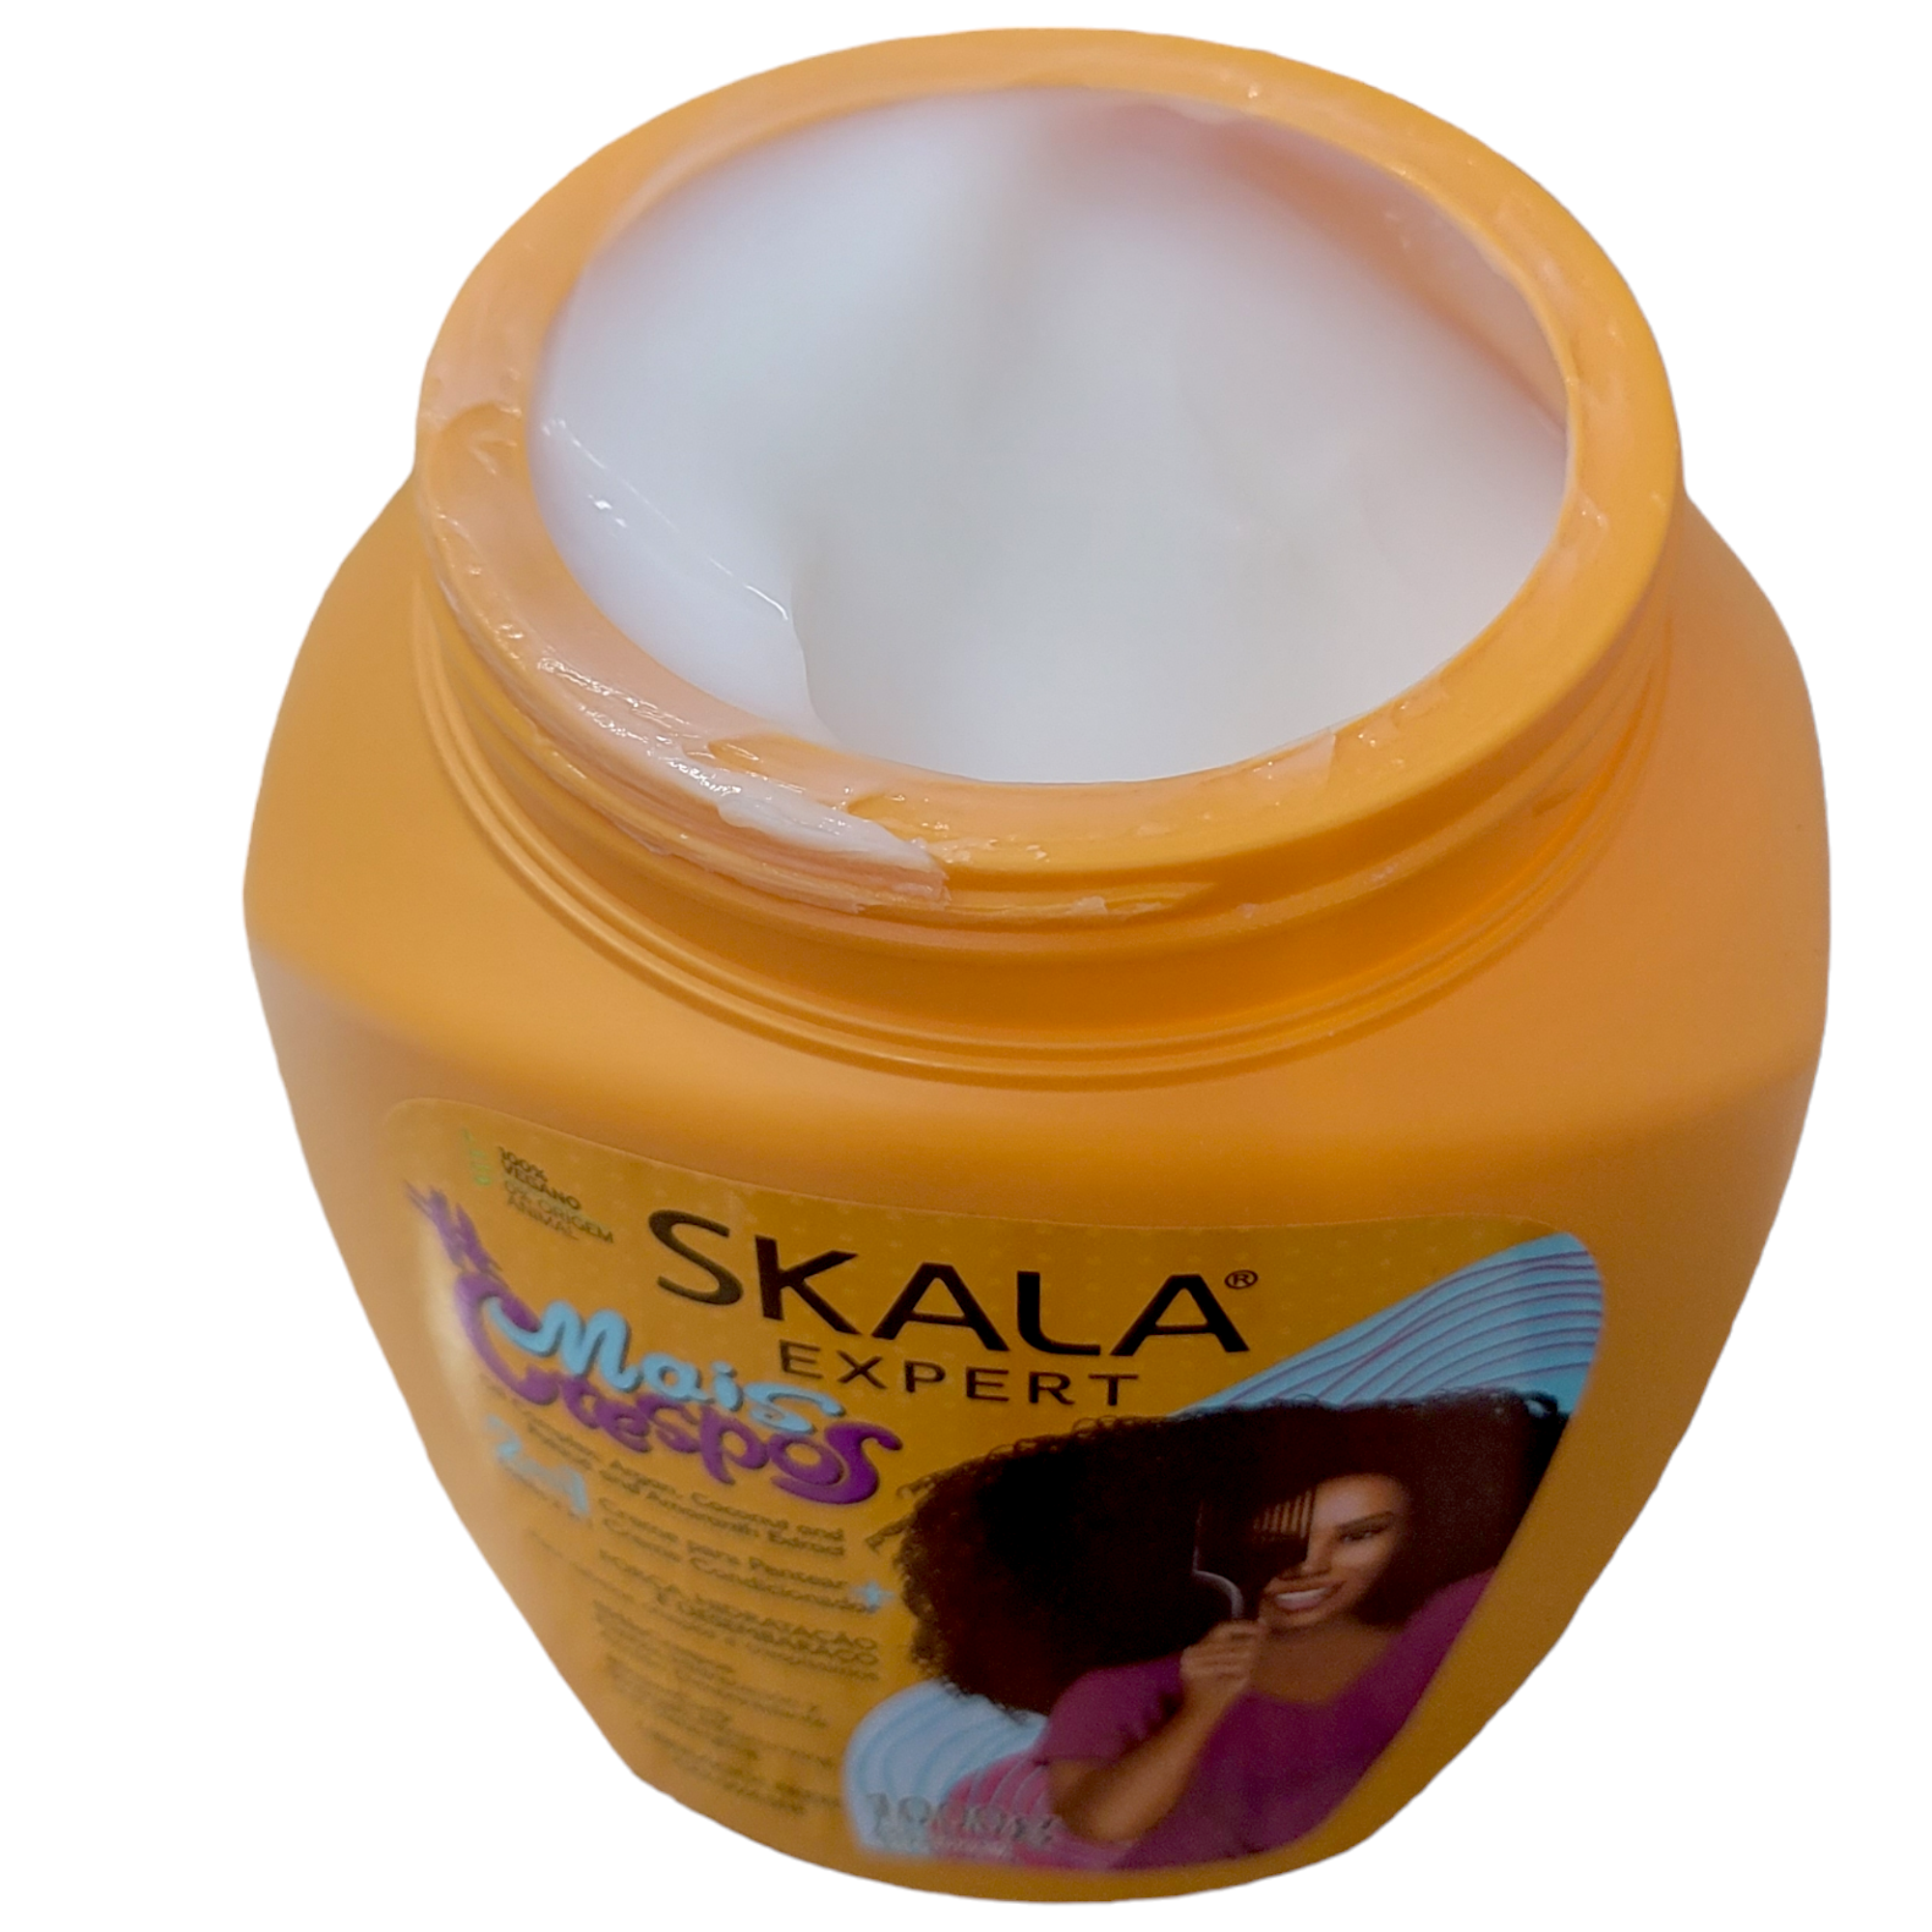 Skala Expert Mais Crespos Hair Treatment for Curly and Afro Hair: Perfect and Defined curls,Hydration and Softness in a Single Product - image 5 of 9